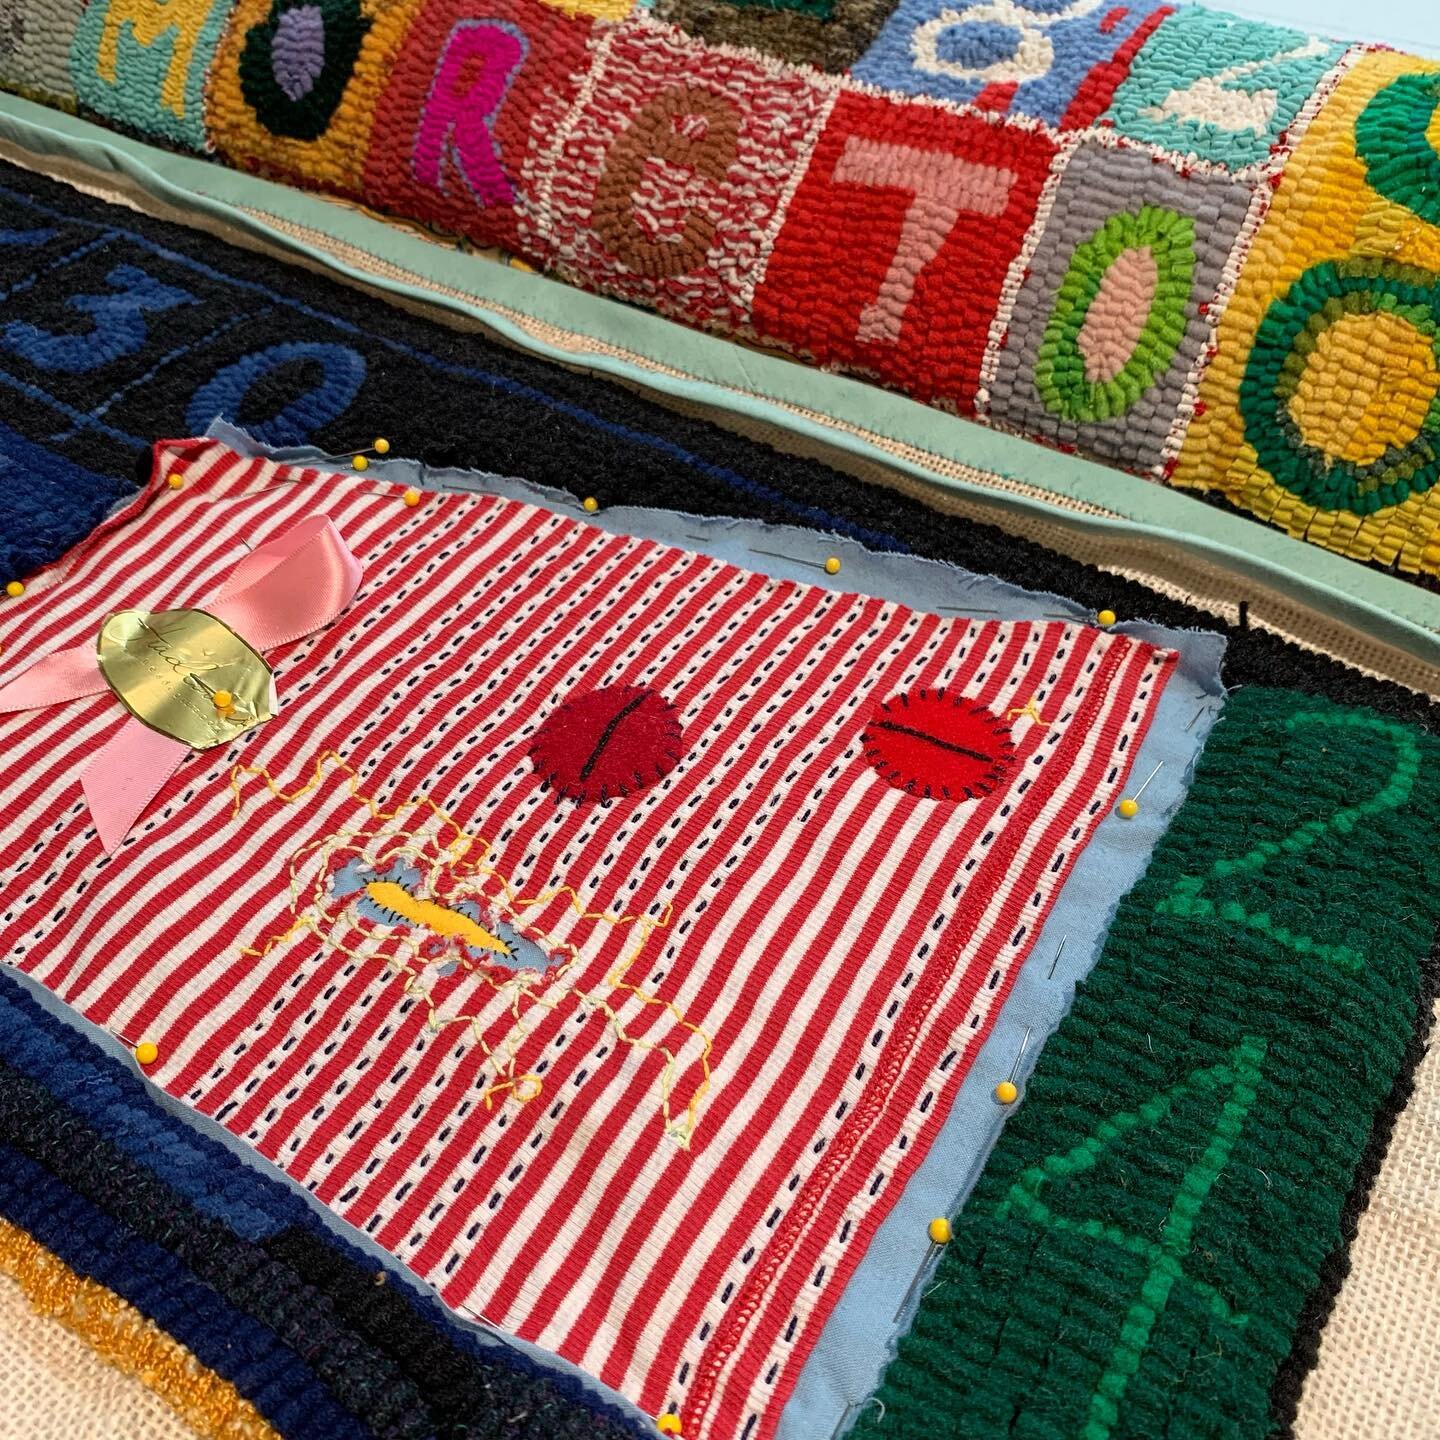 Back at it for a few minutes this morning.
Hoping to start the finishing in the next few days&hellip;
.
.
.
.
.
#textileart
#contemporarytextileart
#handhookedart
#contemporaryrughooking
#handcraftsmanship
#textilejournal
#textilediary
#mixedmediatex